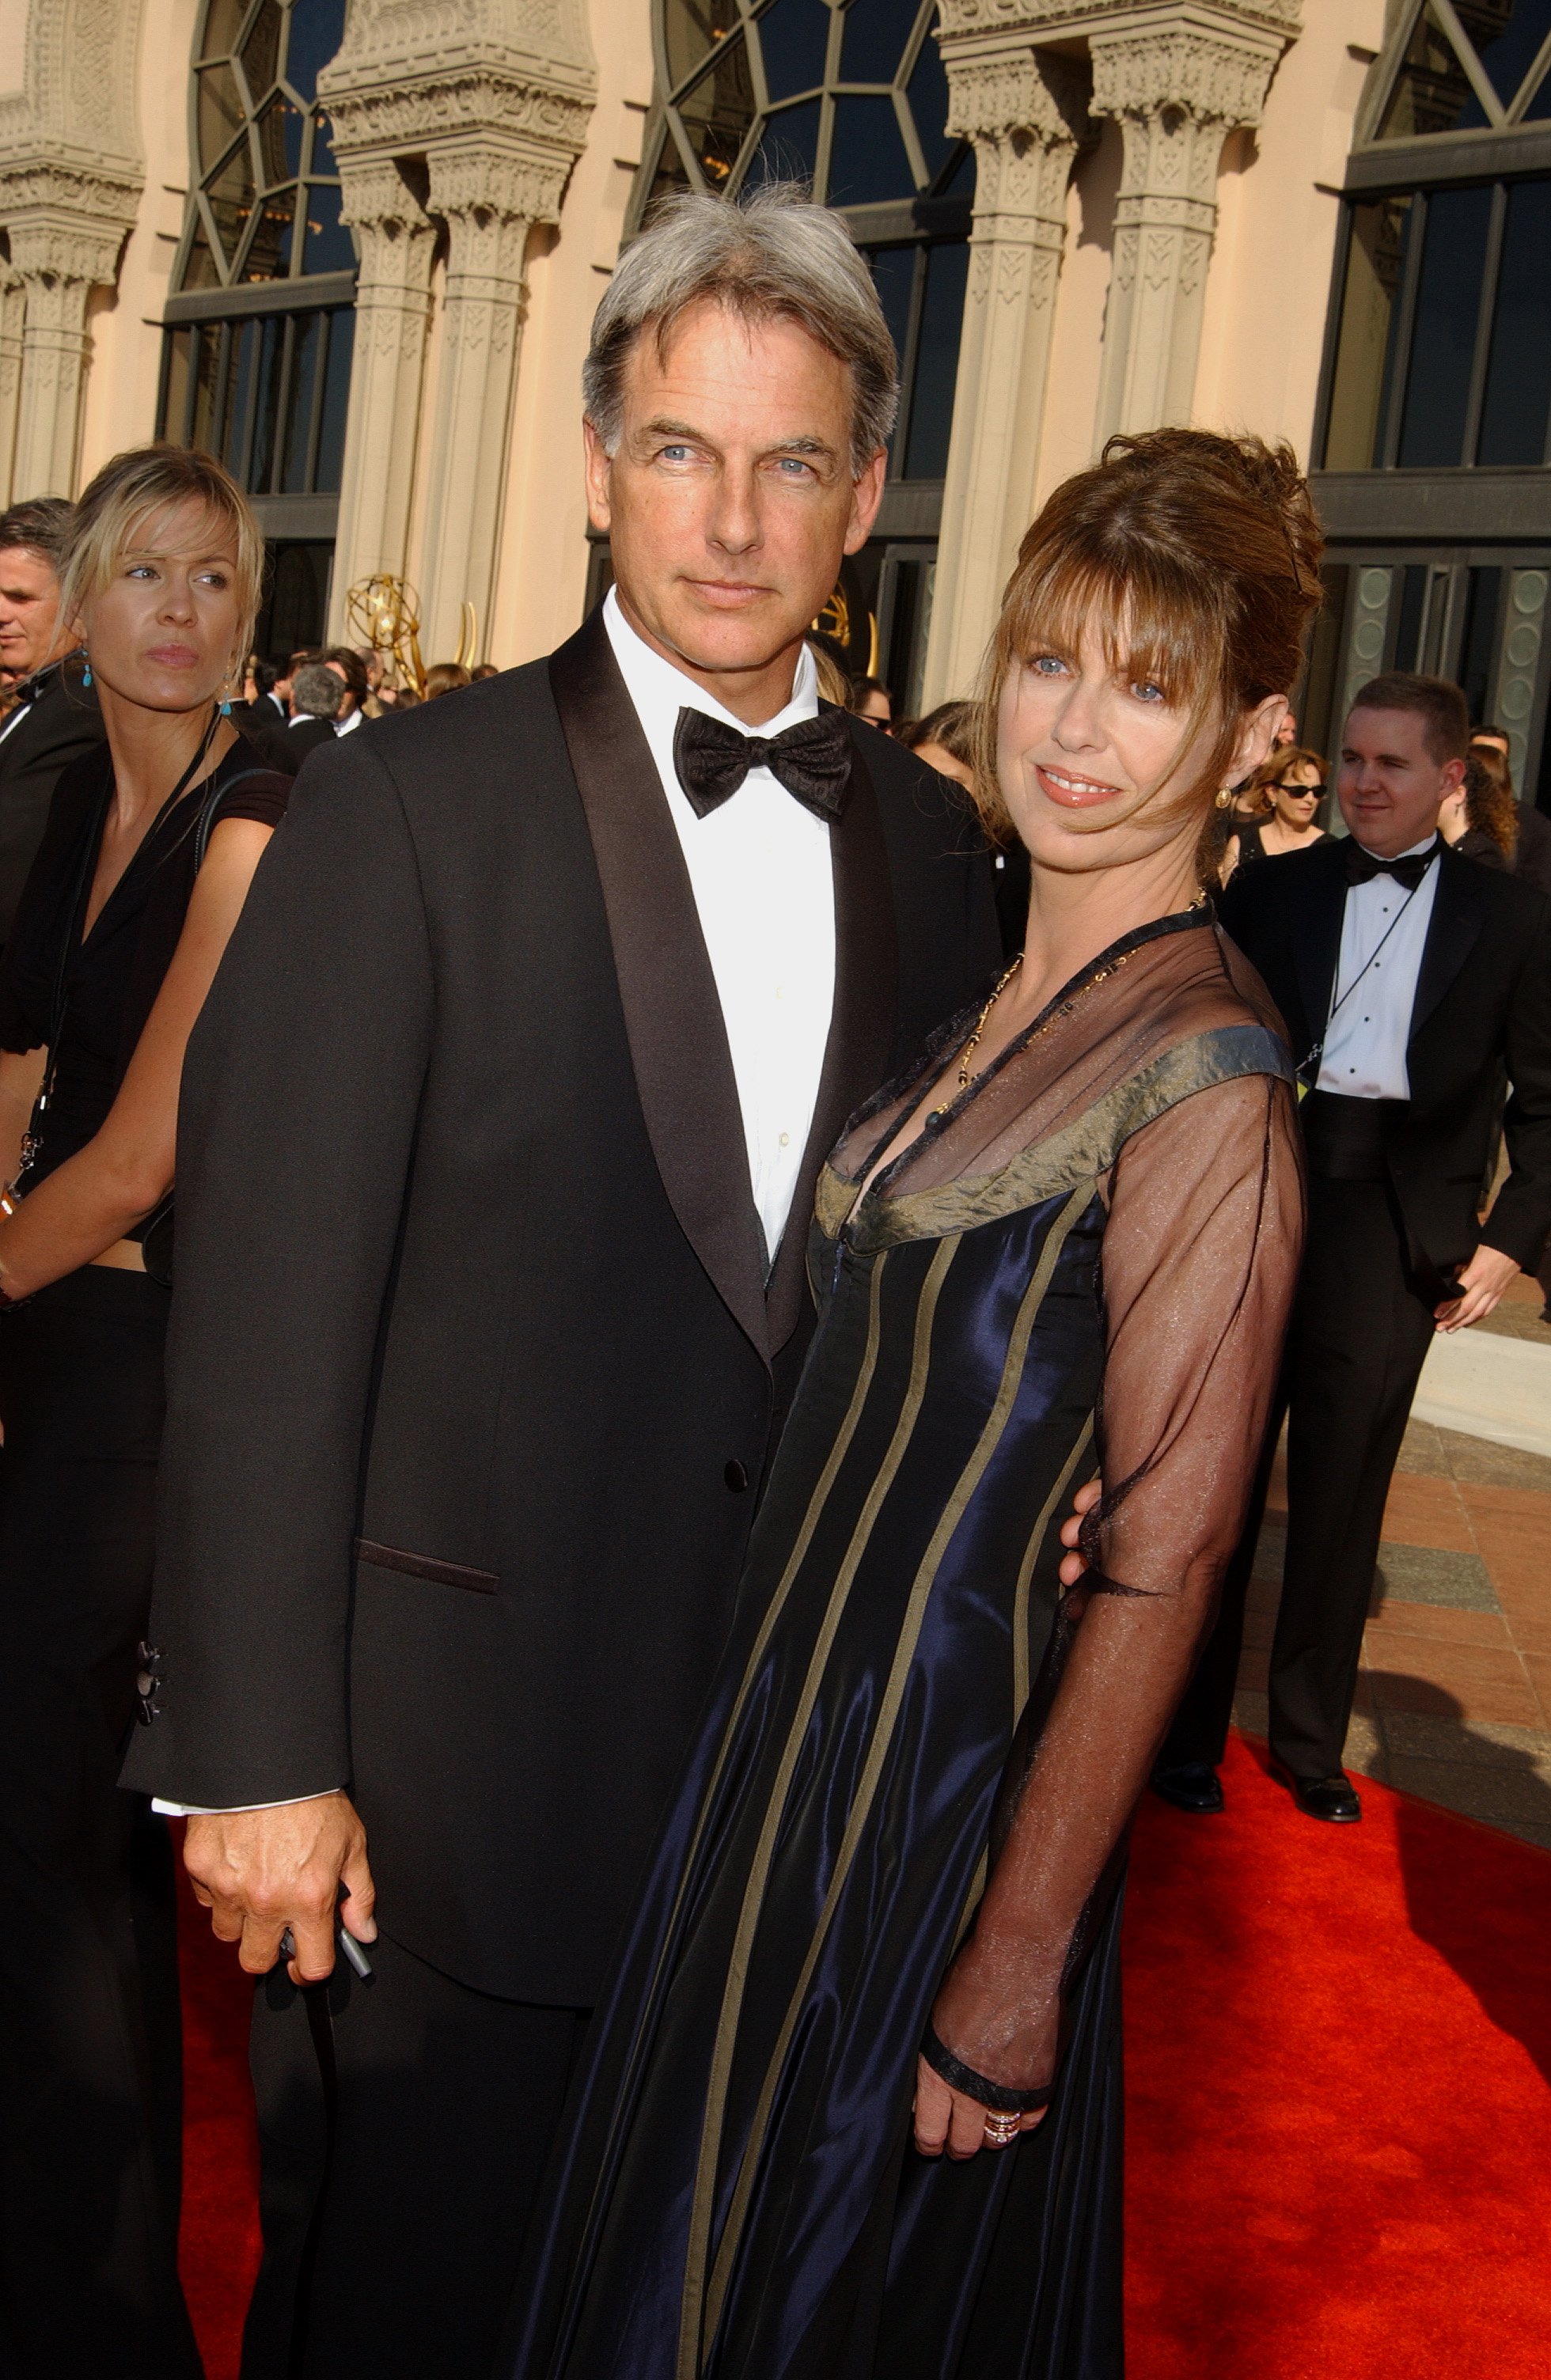 Mark Harmon and Pam Dawber arriving at 2002 Creative Arts Awards. | Source: Getty Images